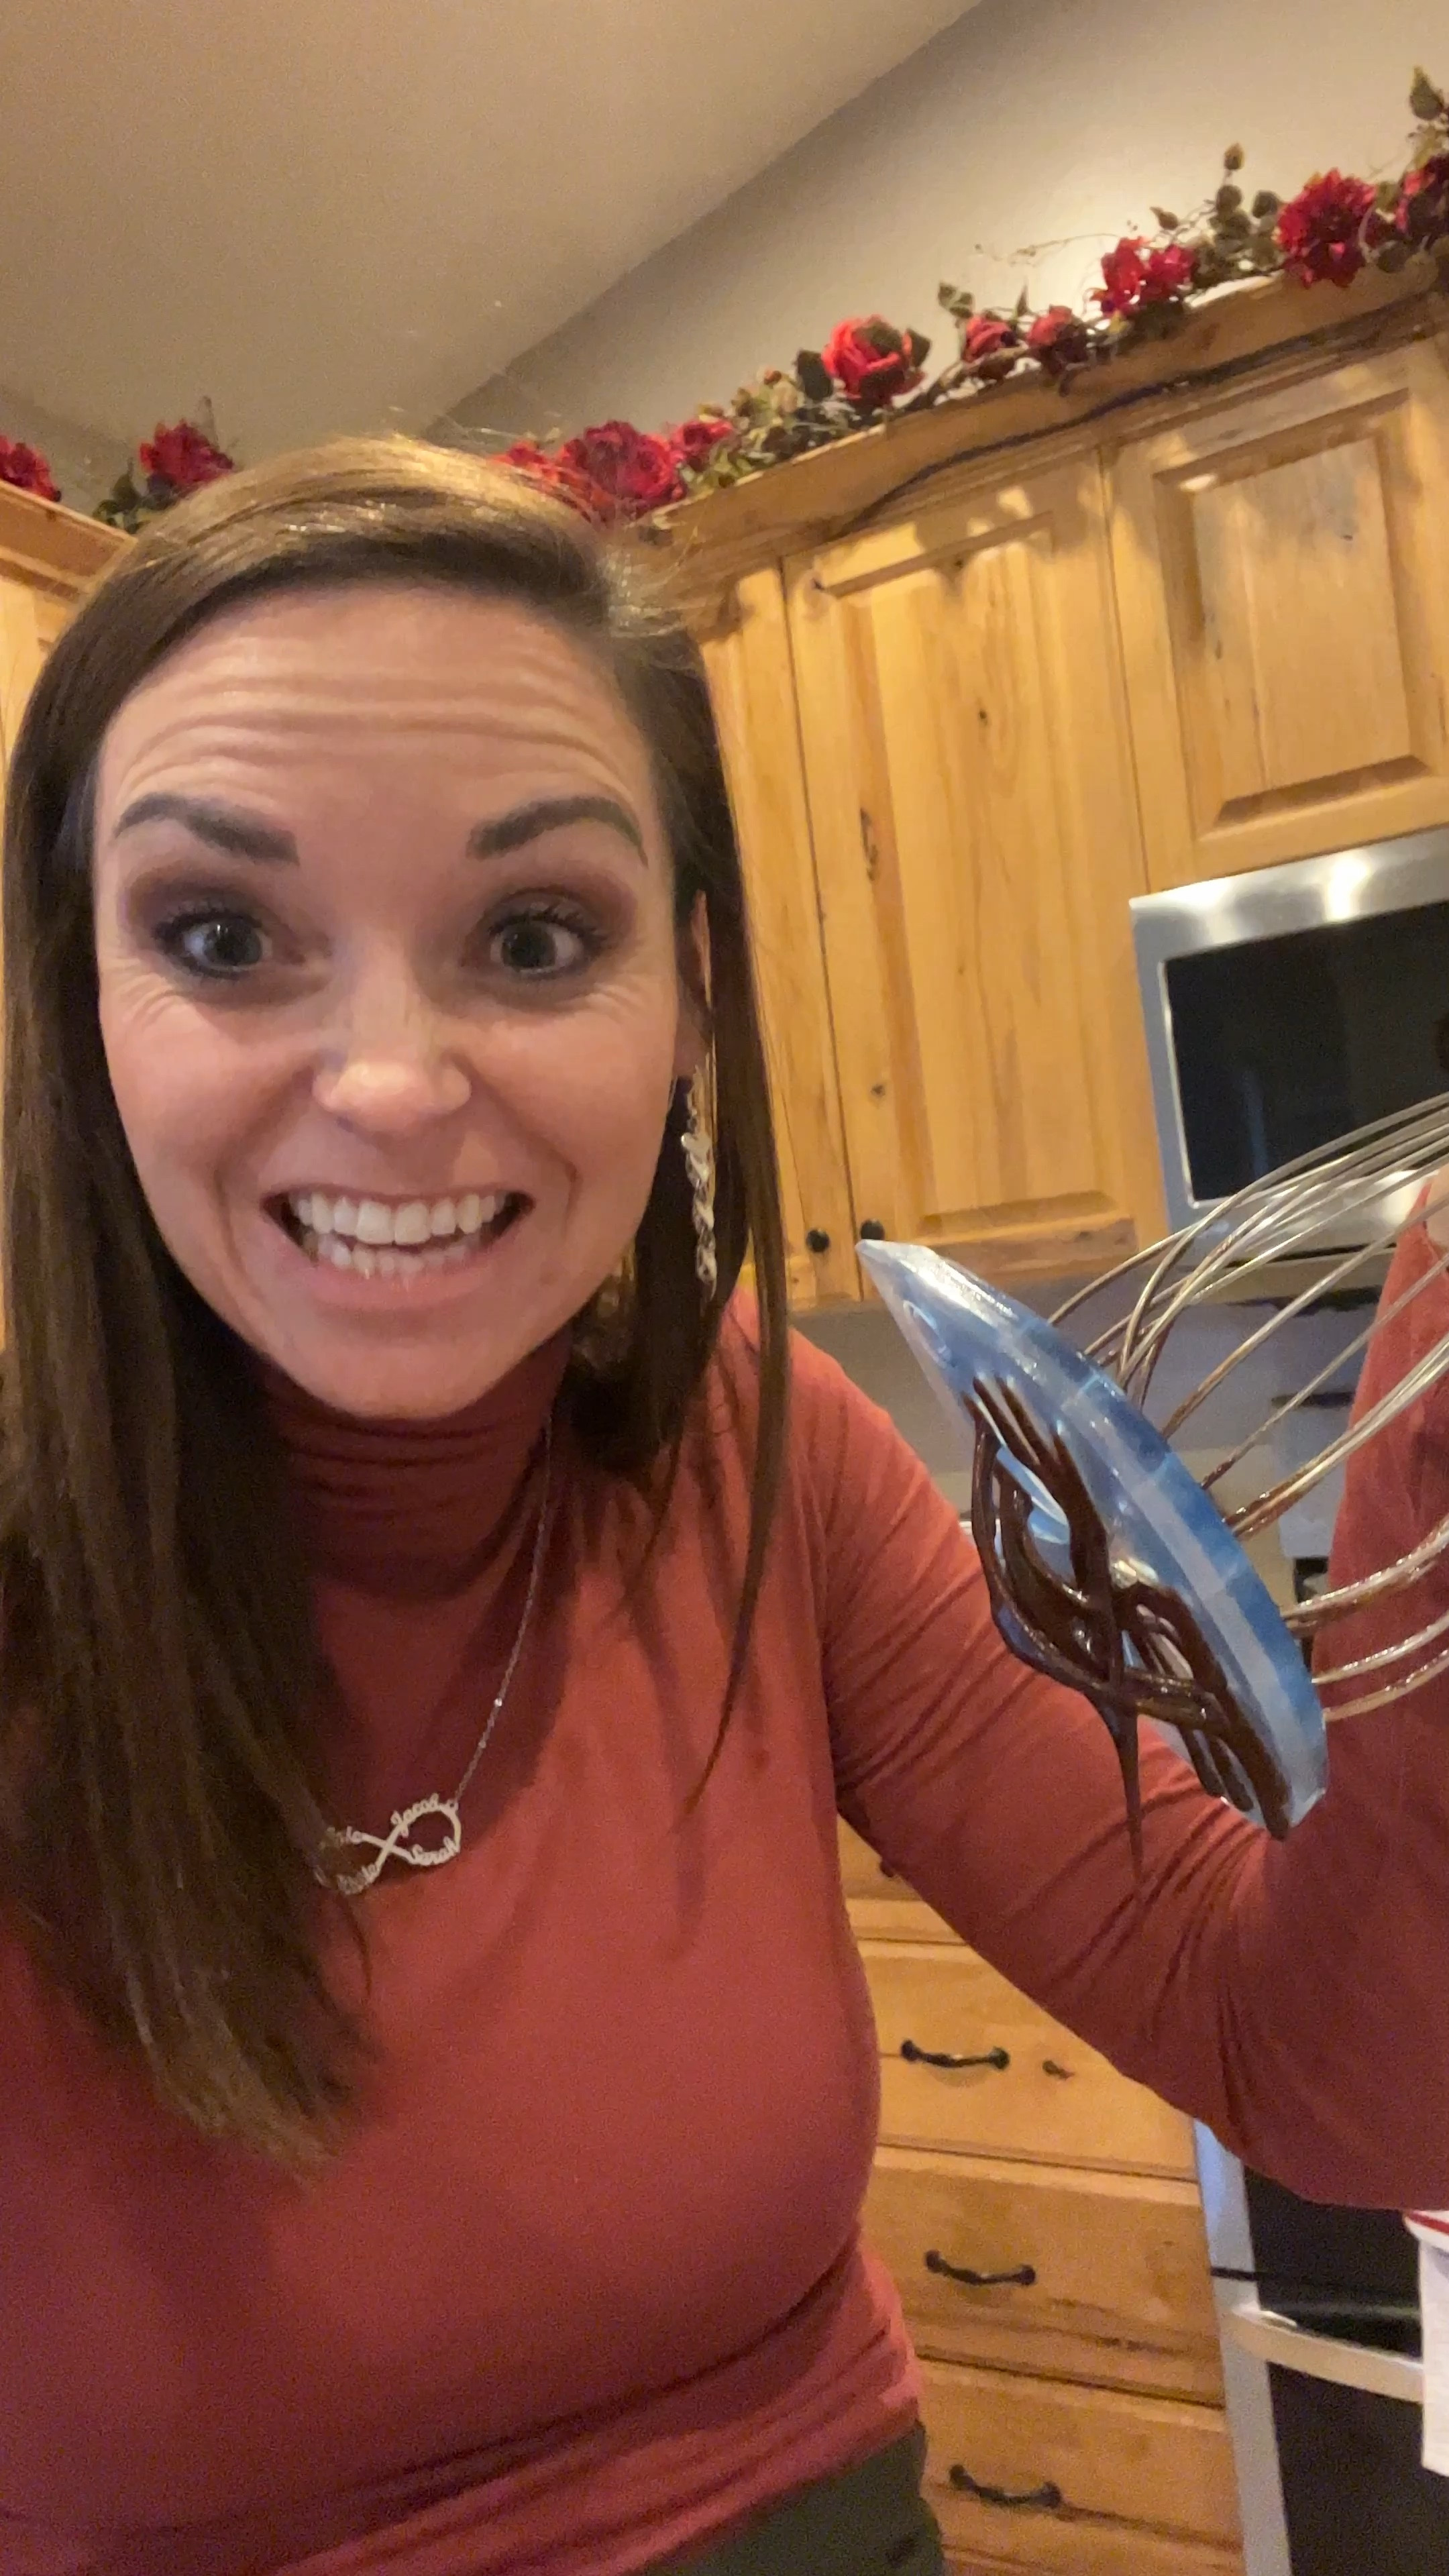 Whisk Wiper - Wipe a Whisk Easily - Multipurpose Kitchen Tool